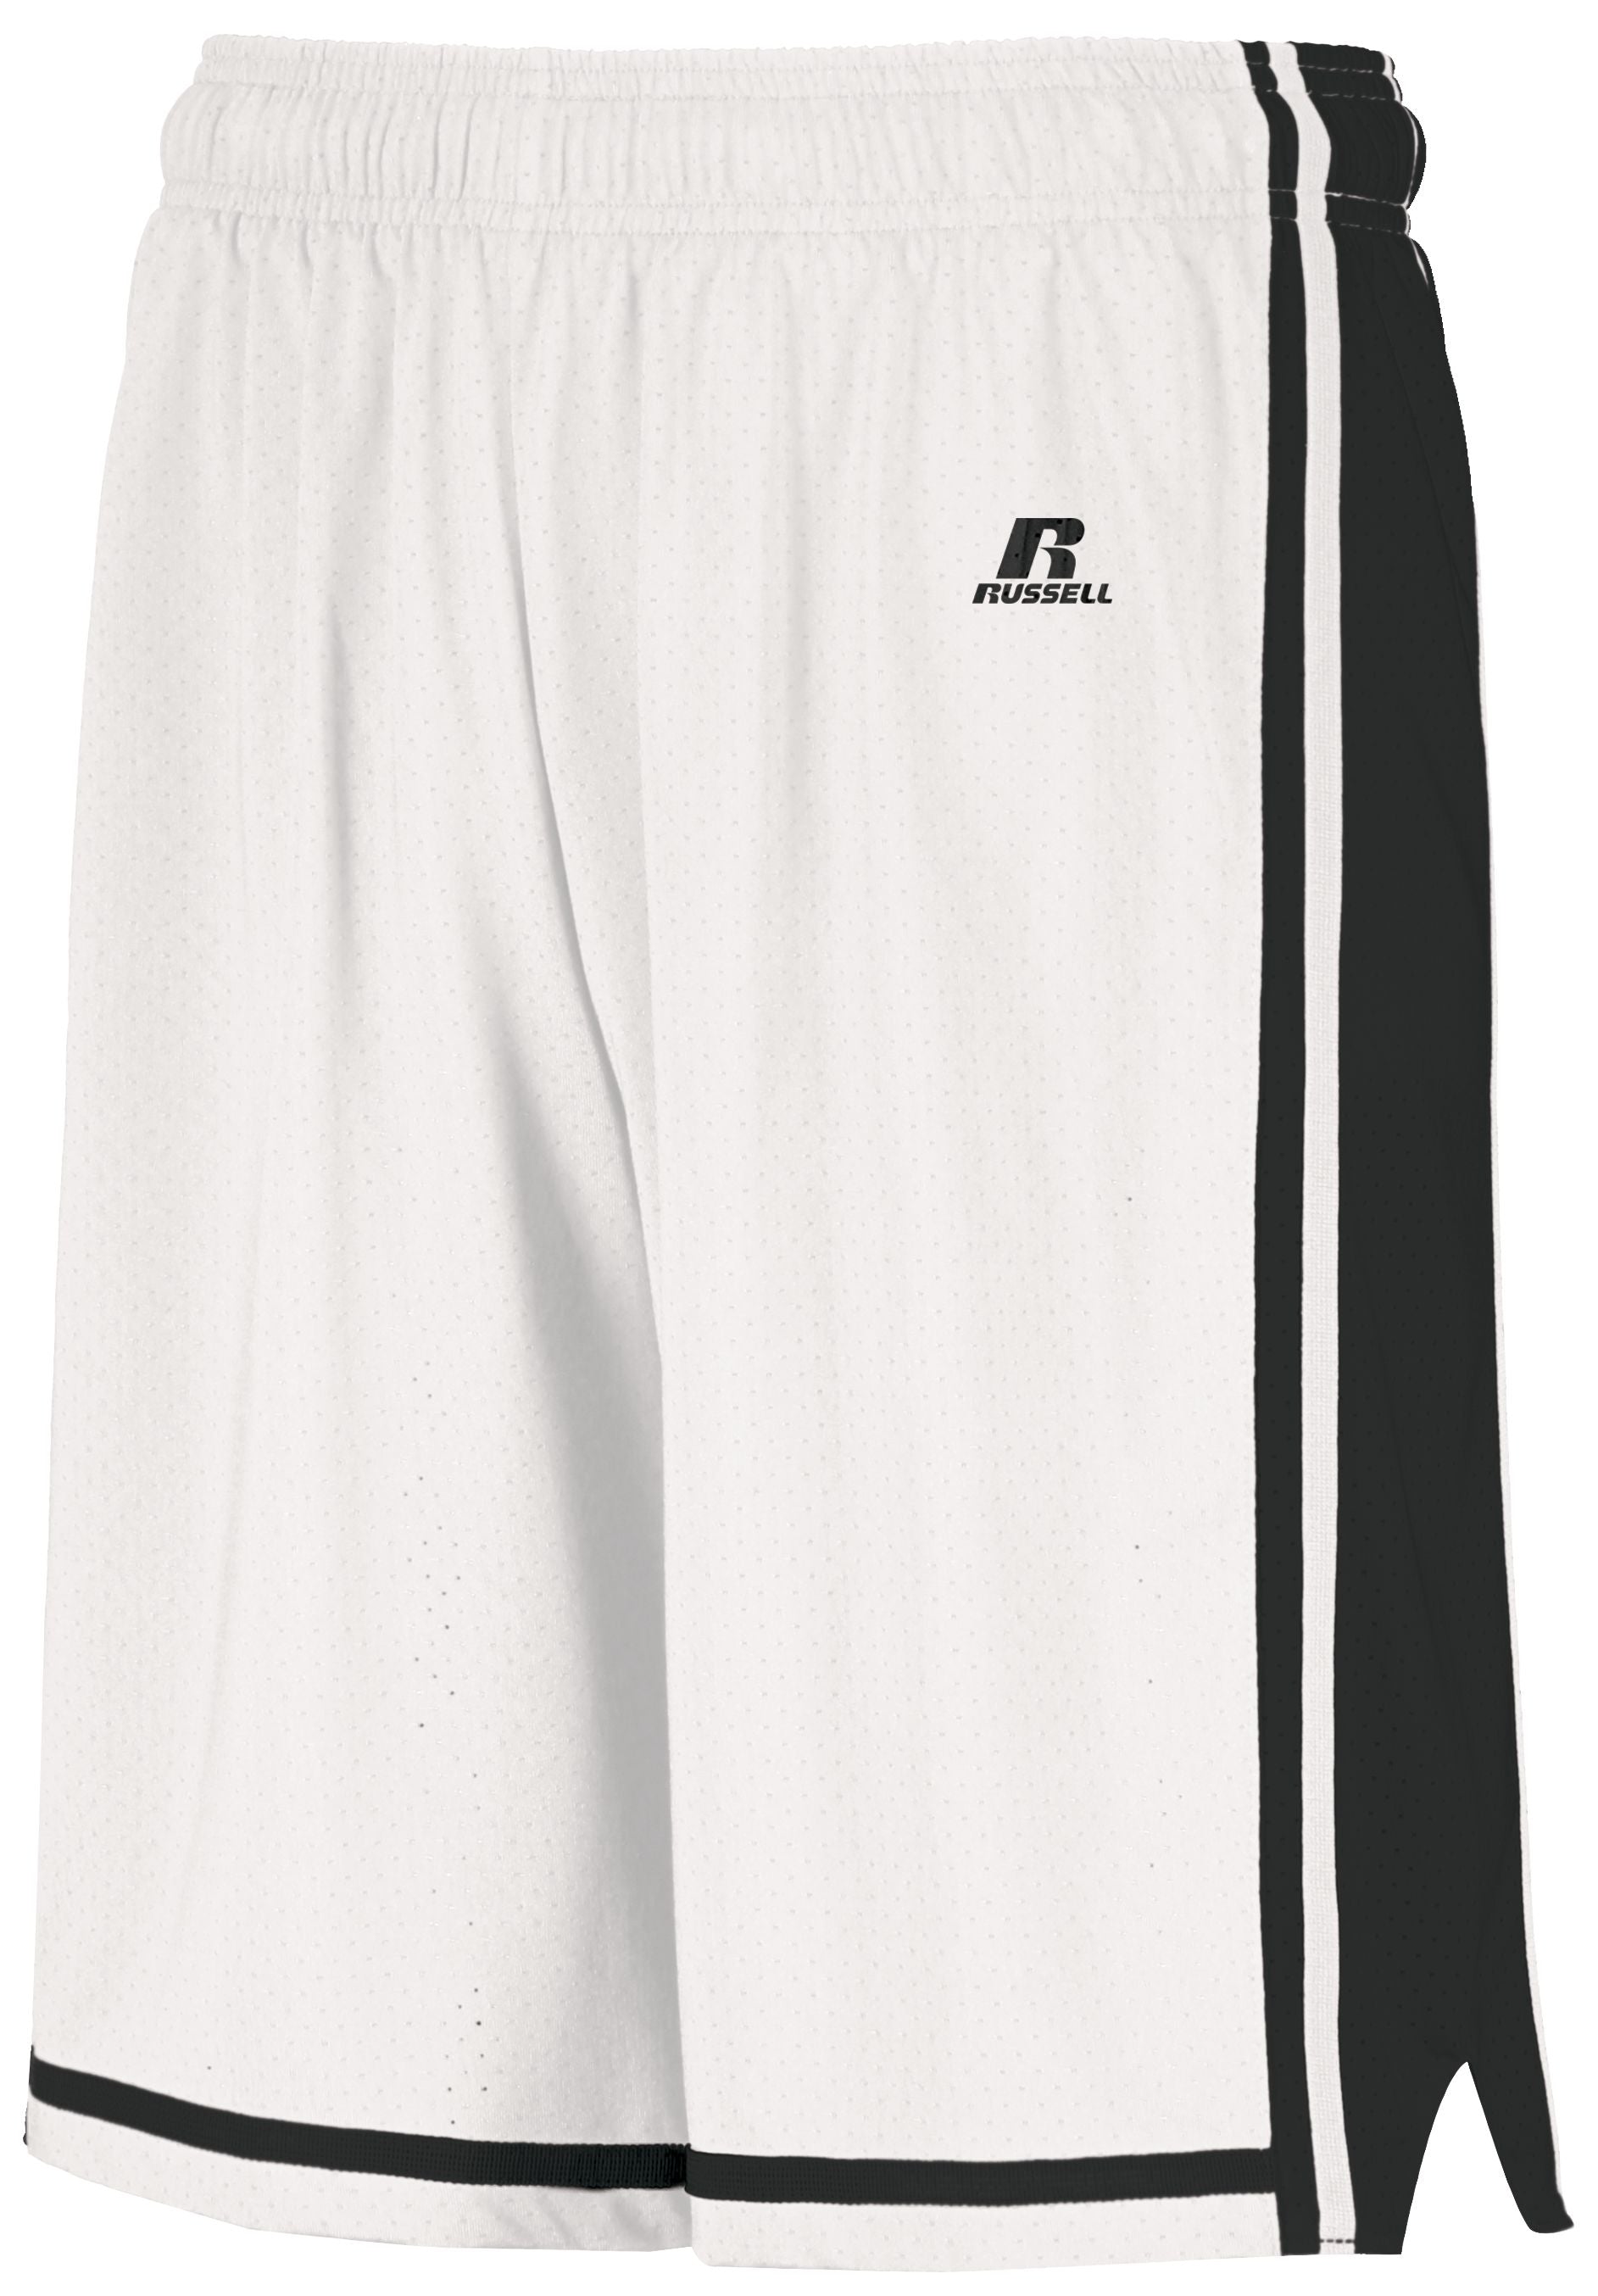 Russell Athletic Youth Legacy Basketball Shorts in White/Black  -Part of the Youth, Youth-Shorts, Basketball, Russell-Athletic-Products, All-Sports, All-Sports-1 product lines at KanaleyCreations.com